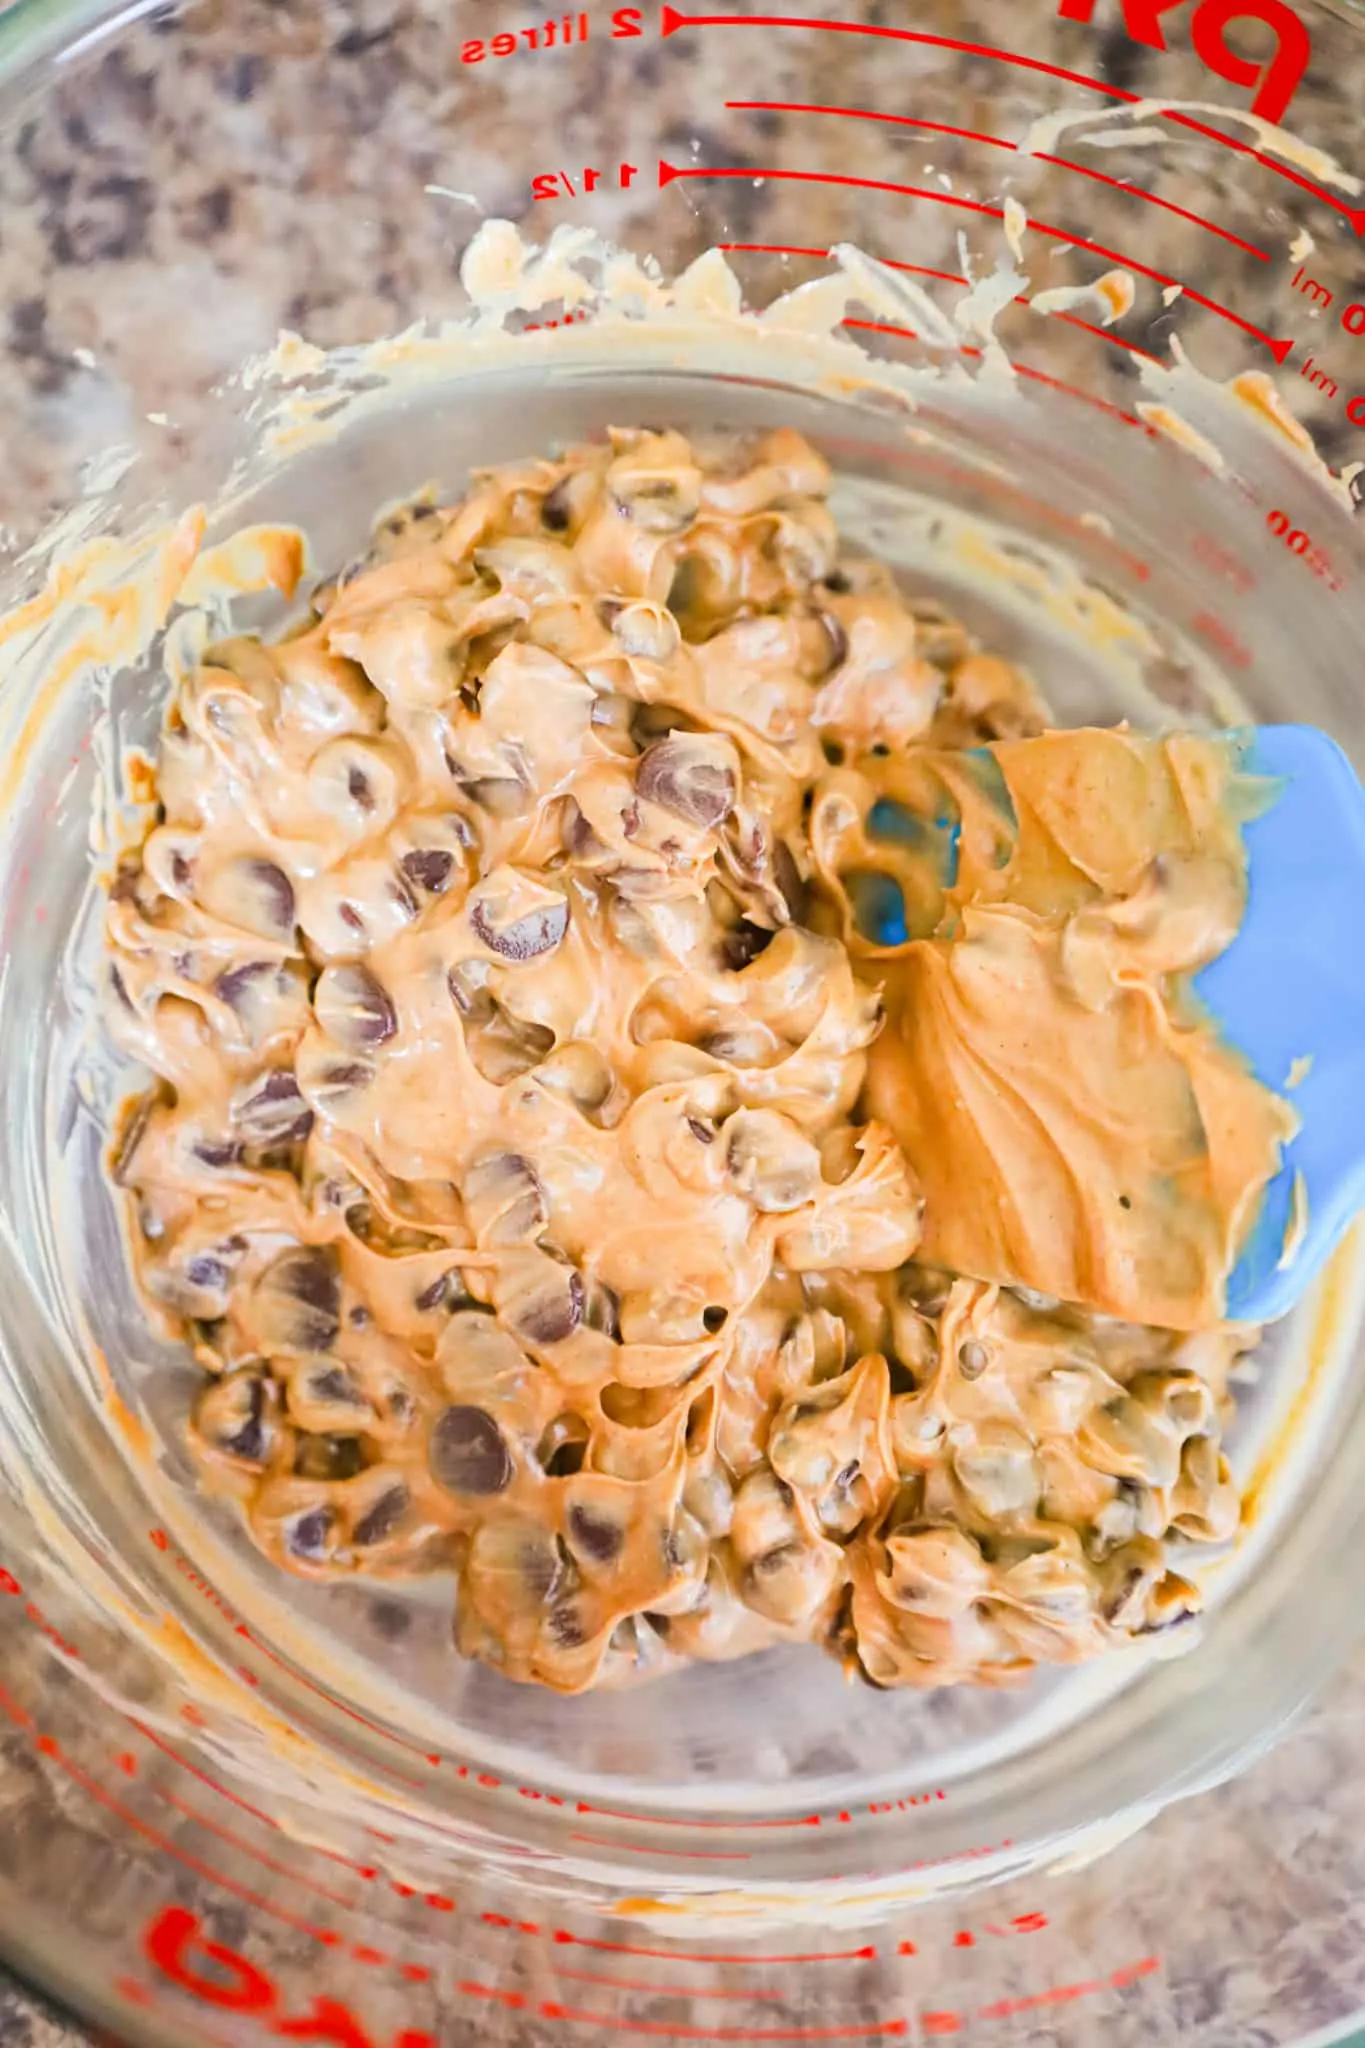 peanut butter and chocolate chips being stirred together in a glass bowl